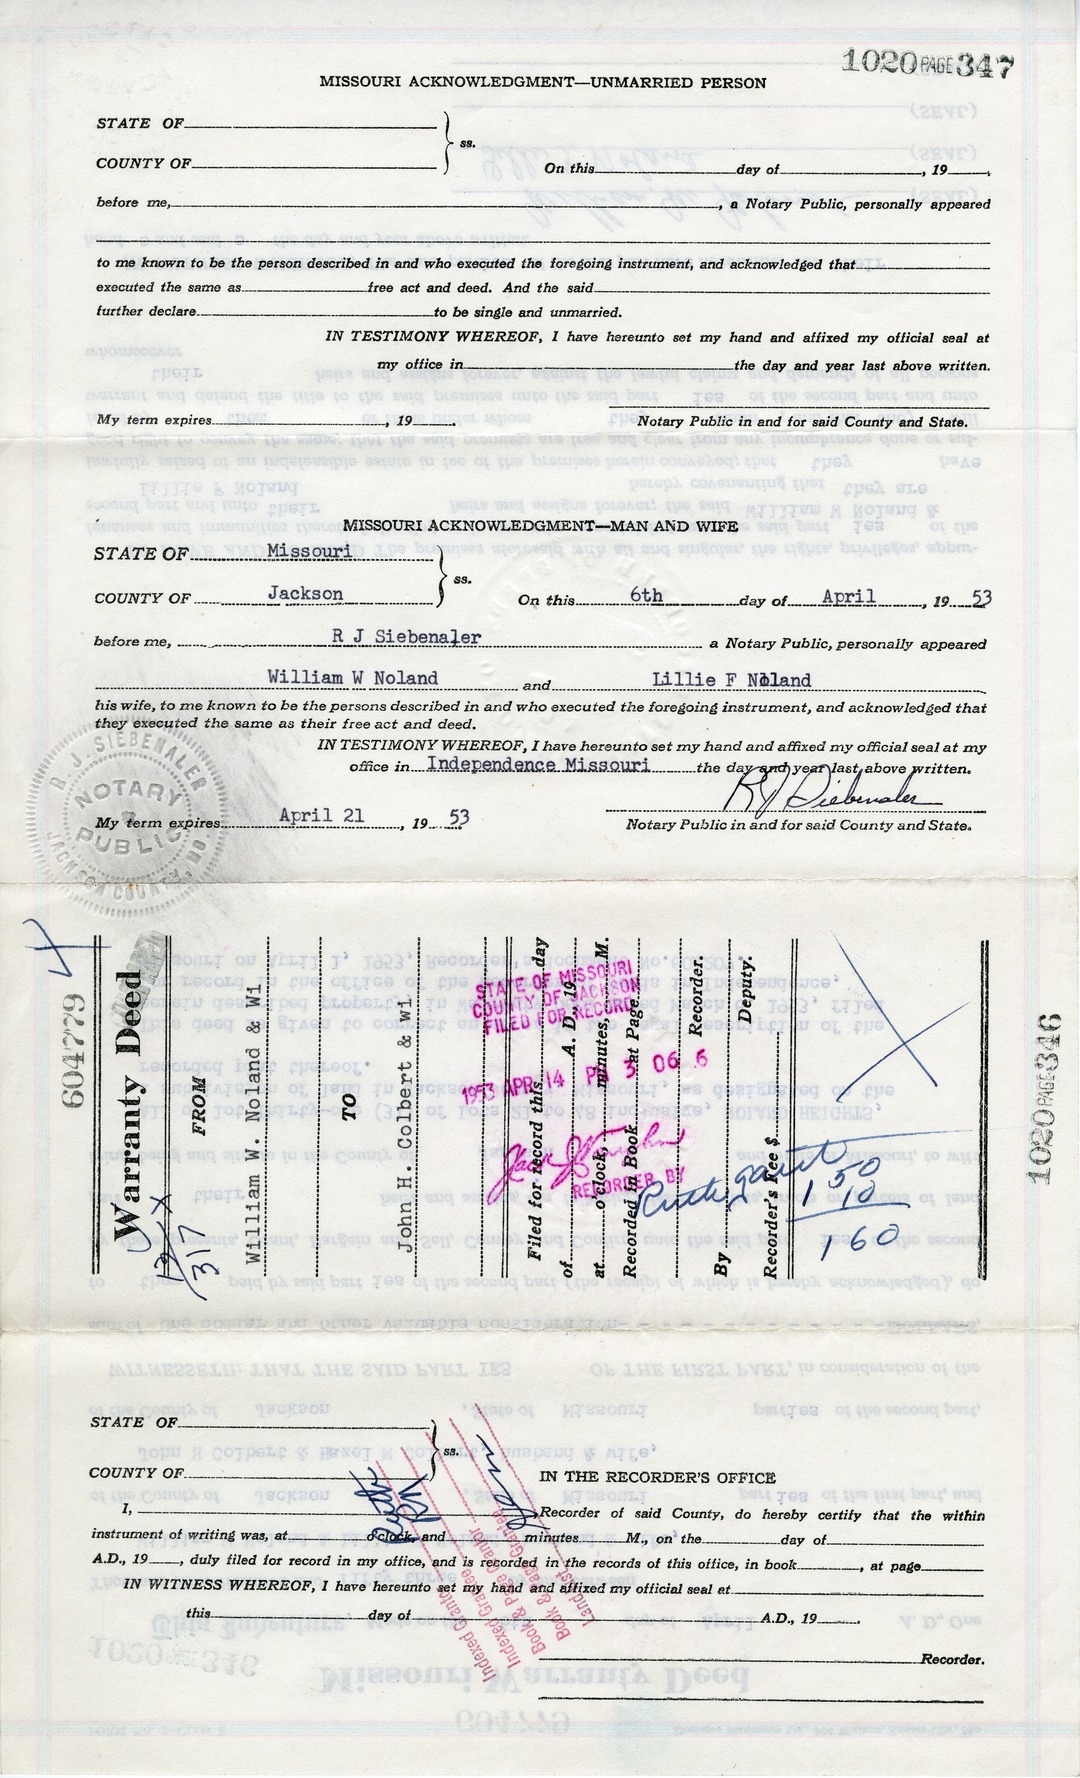 Warranty Deed from William W. Noland and Lillie F. Noland to John H. Colbert and Hazel M. Colbert